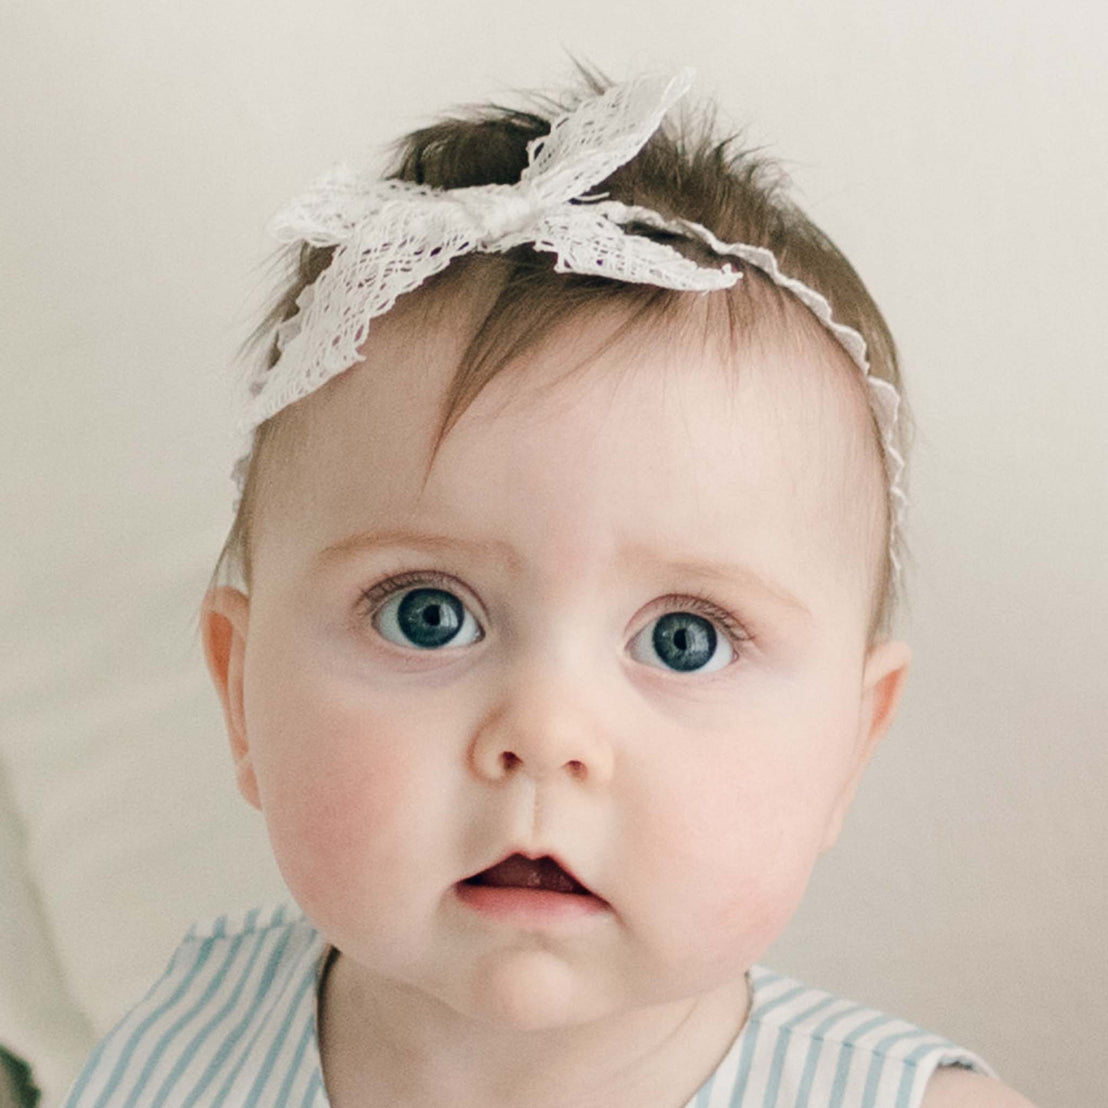 A close-up portrait of a baby with large blue eyes and dark hair, wearing the Thea Lace Headband, dressed the blue Thea Wrap Dress, against a neutral background.